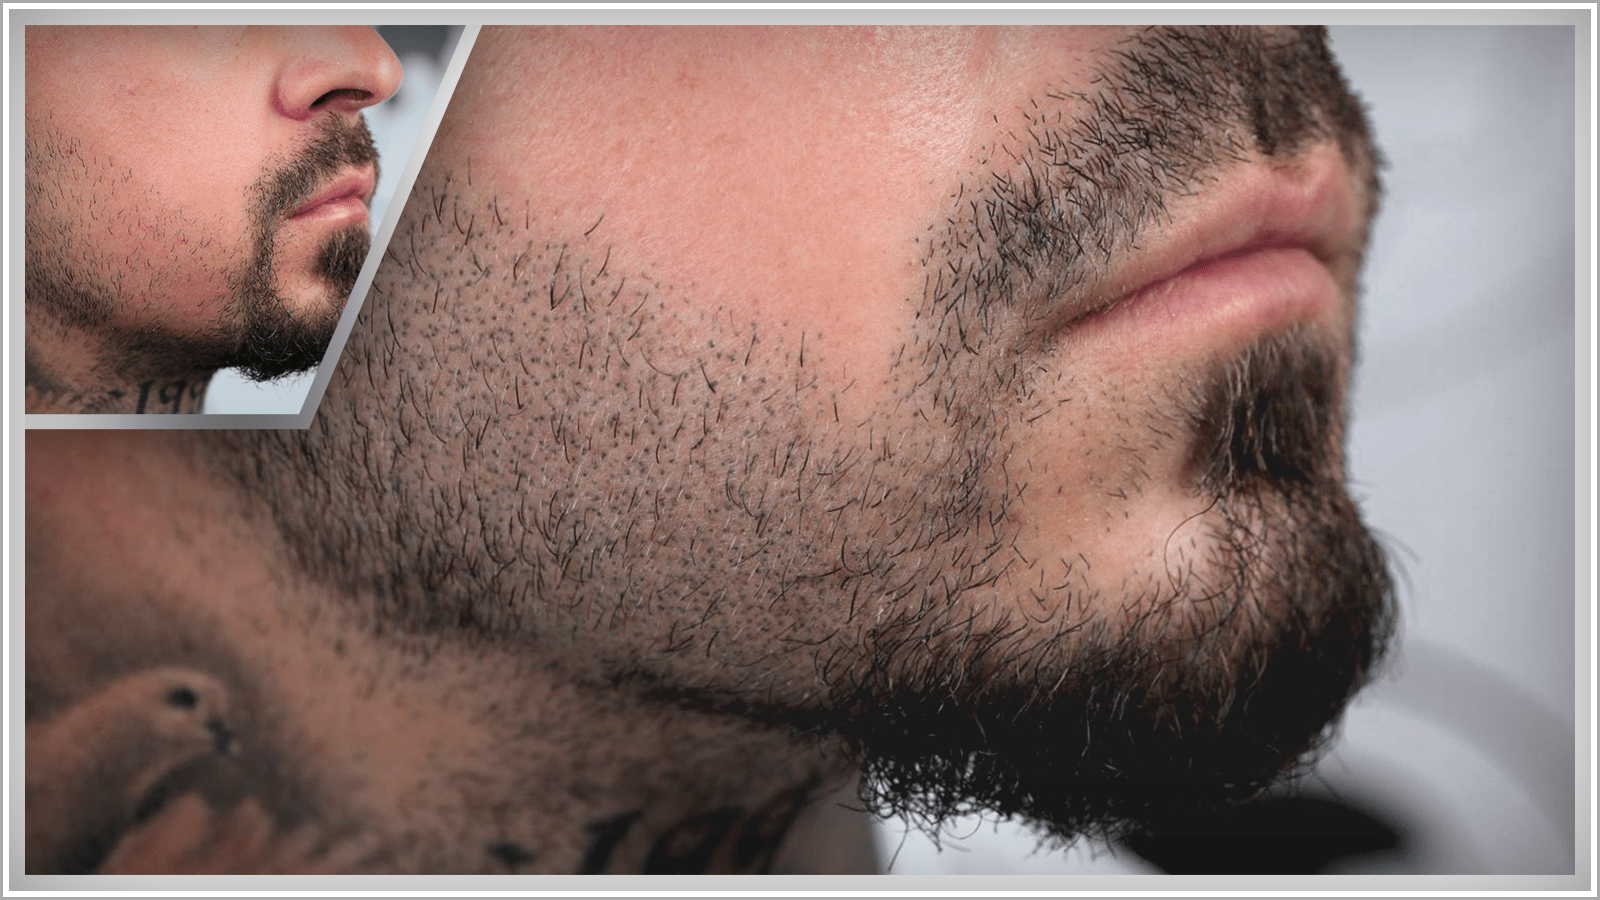 Bald beard rogaine spots for How to